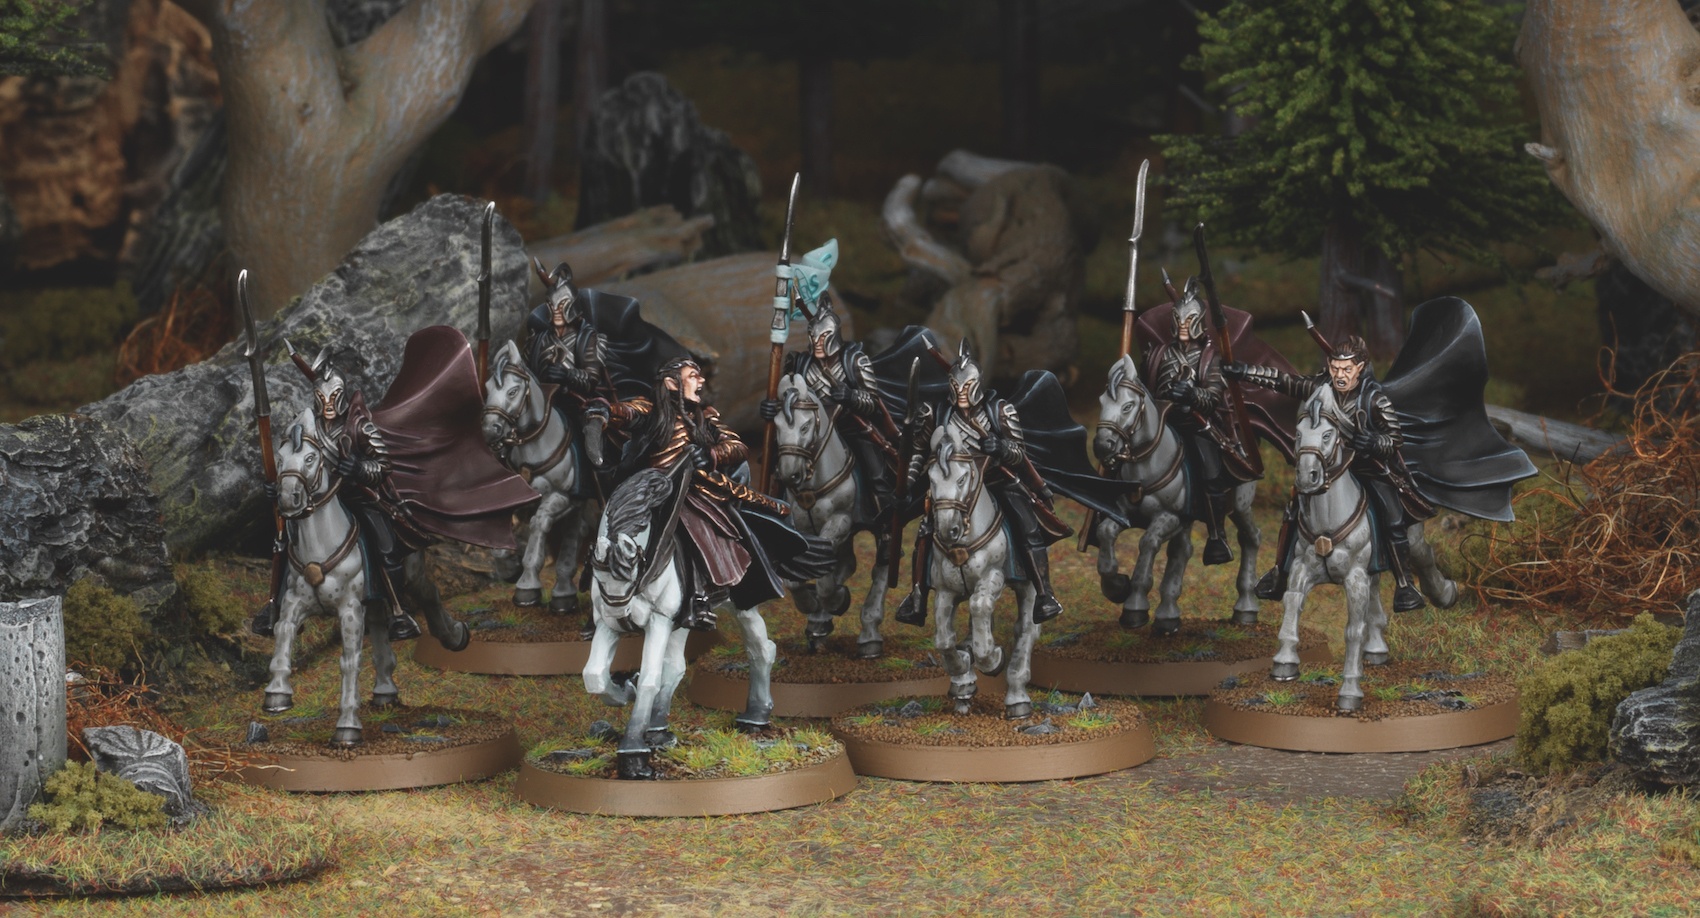 Warhammer Lord of the Rings: Easterling Warriors Miniatures - Walmart.com